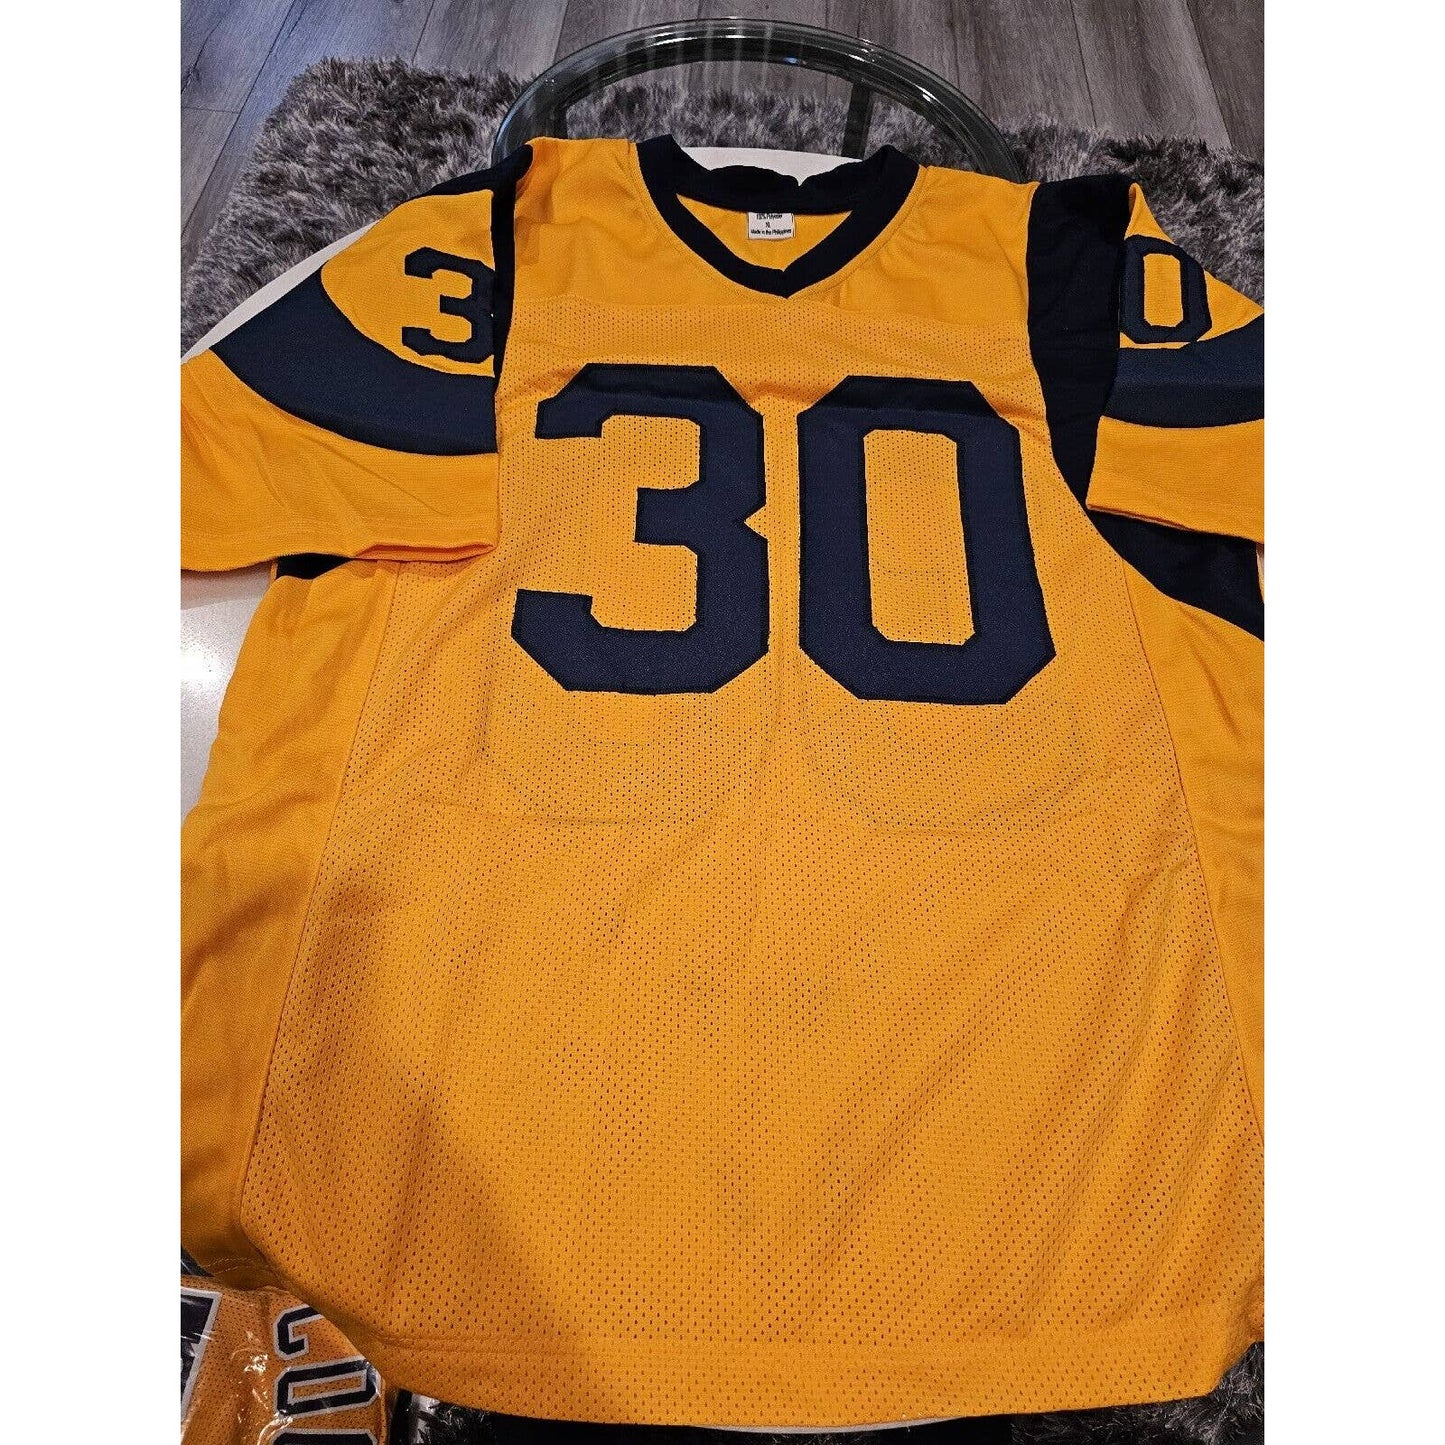 Todd Gurley Autographed/Signed Jersey Beckett Georgia Bulldogs Los Angeles Rams